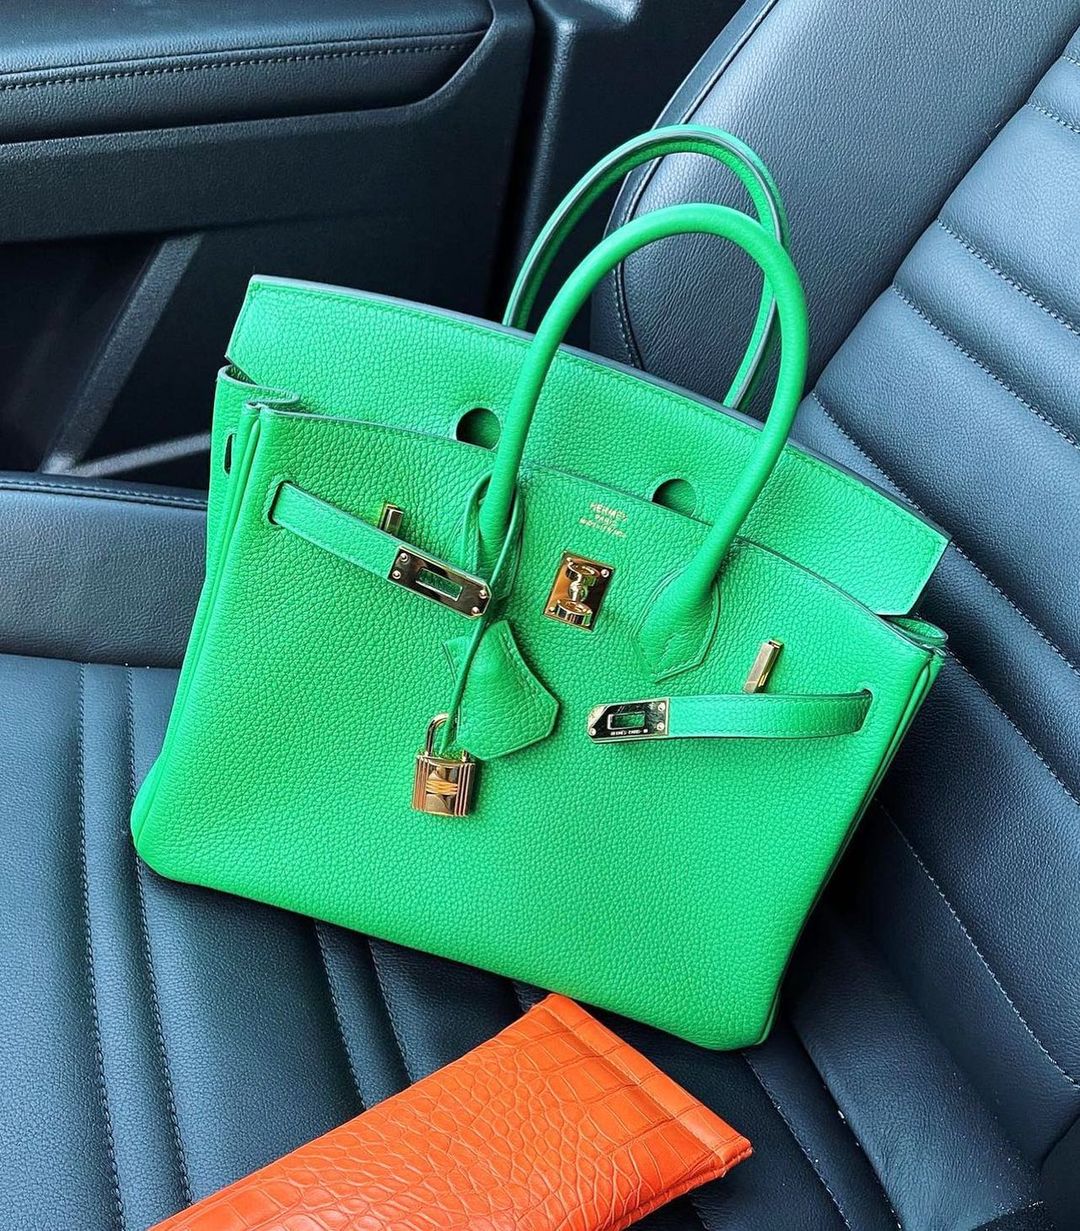 The 12 Most Popular Designer Handbags, As Told by Experts